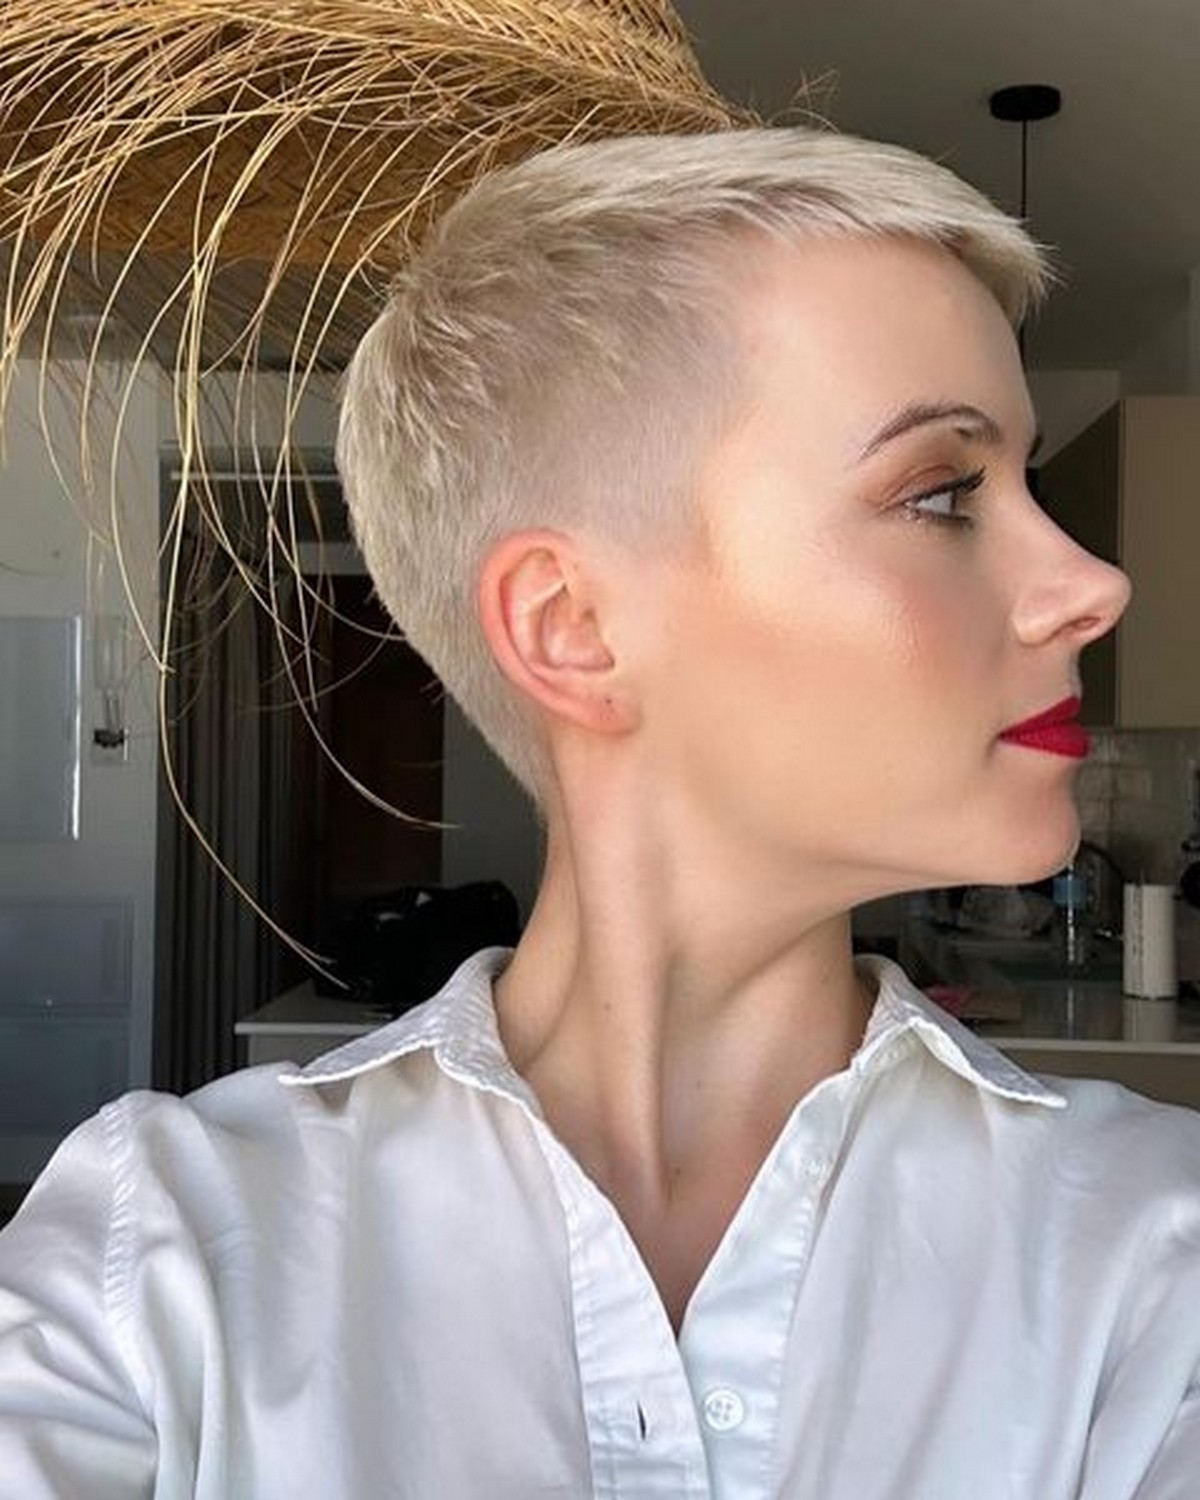 50 Women's Undercut Hairstyles to Make a Statement in 2023